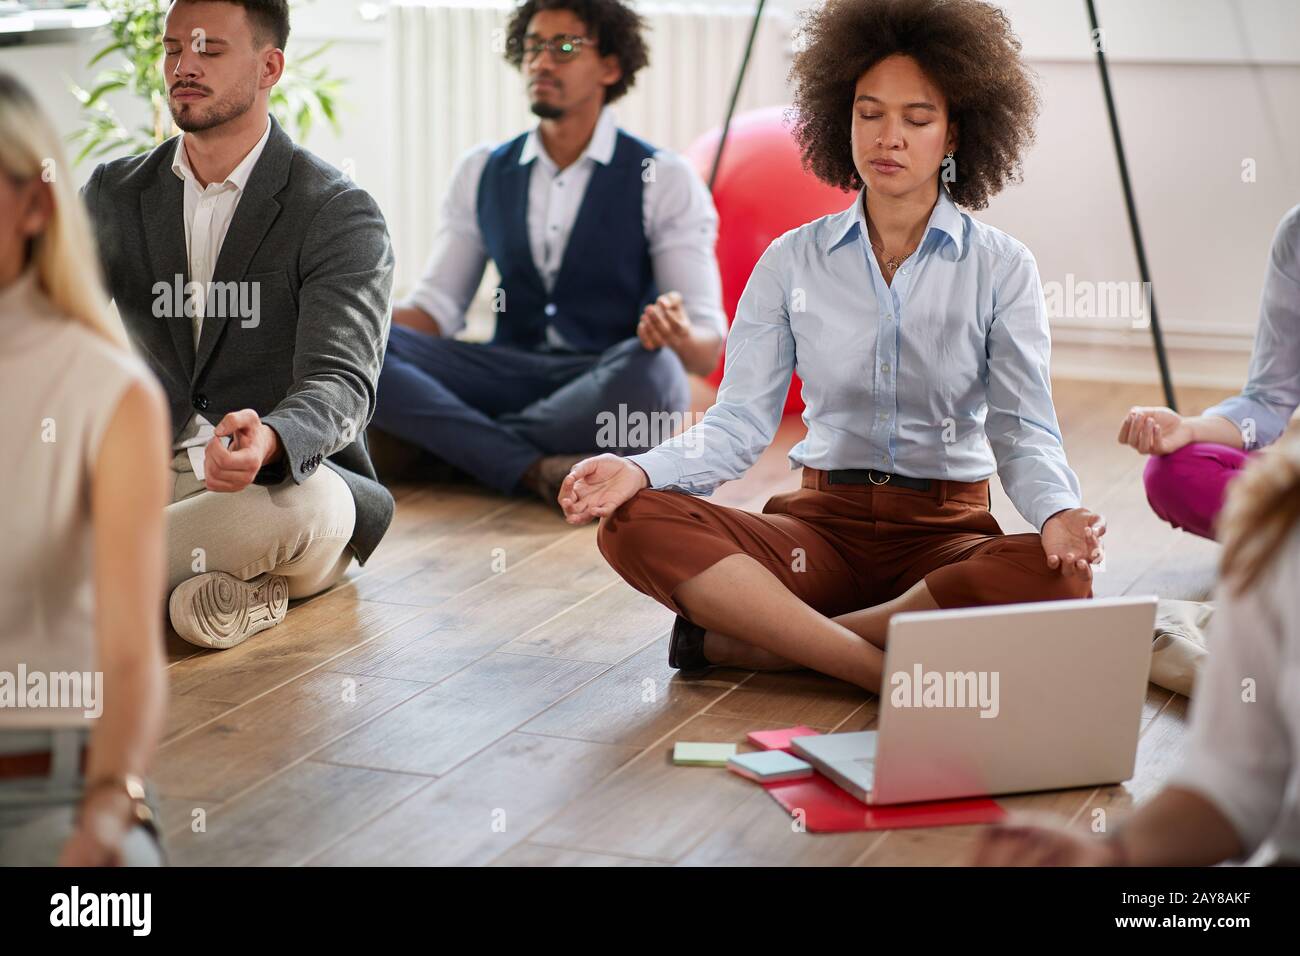 group of business coworkers meditating at work, sitting on the floor with legs crossed and eyes closed. modern, casual, business, meditation concept Stock Photo